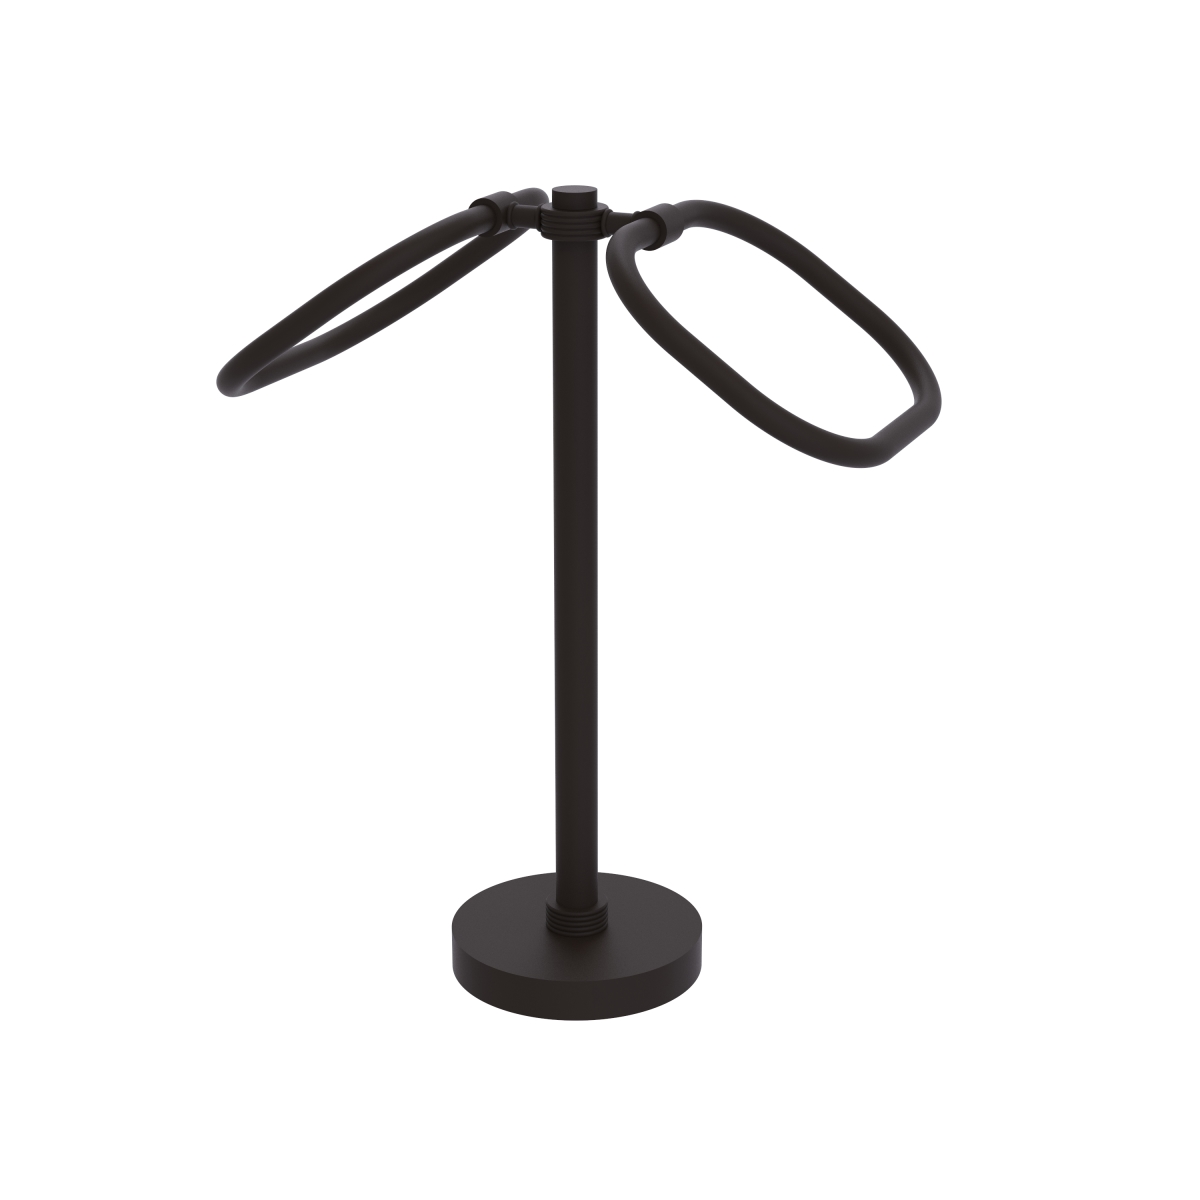 TB-20G-ORB Two Ring Oval Guest Towel Holder, Oil Rubbed Bronze